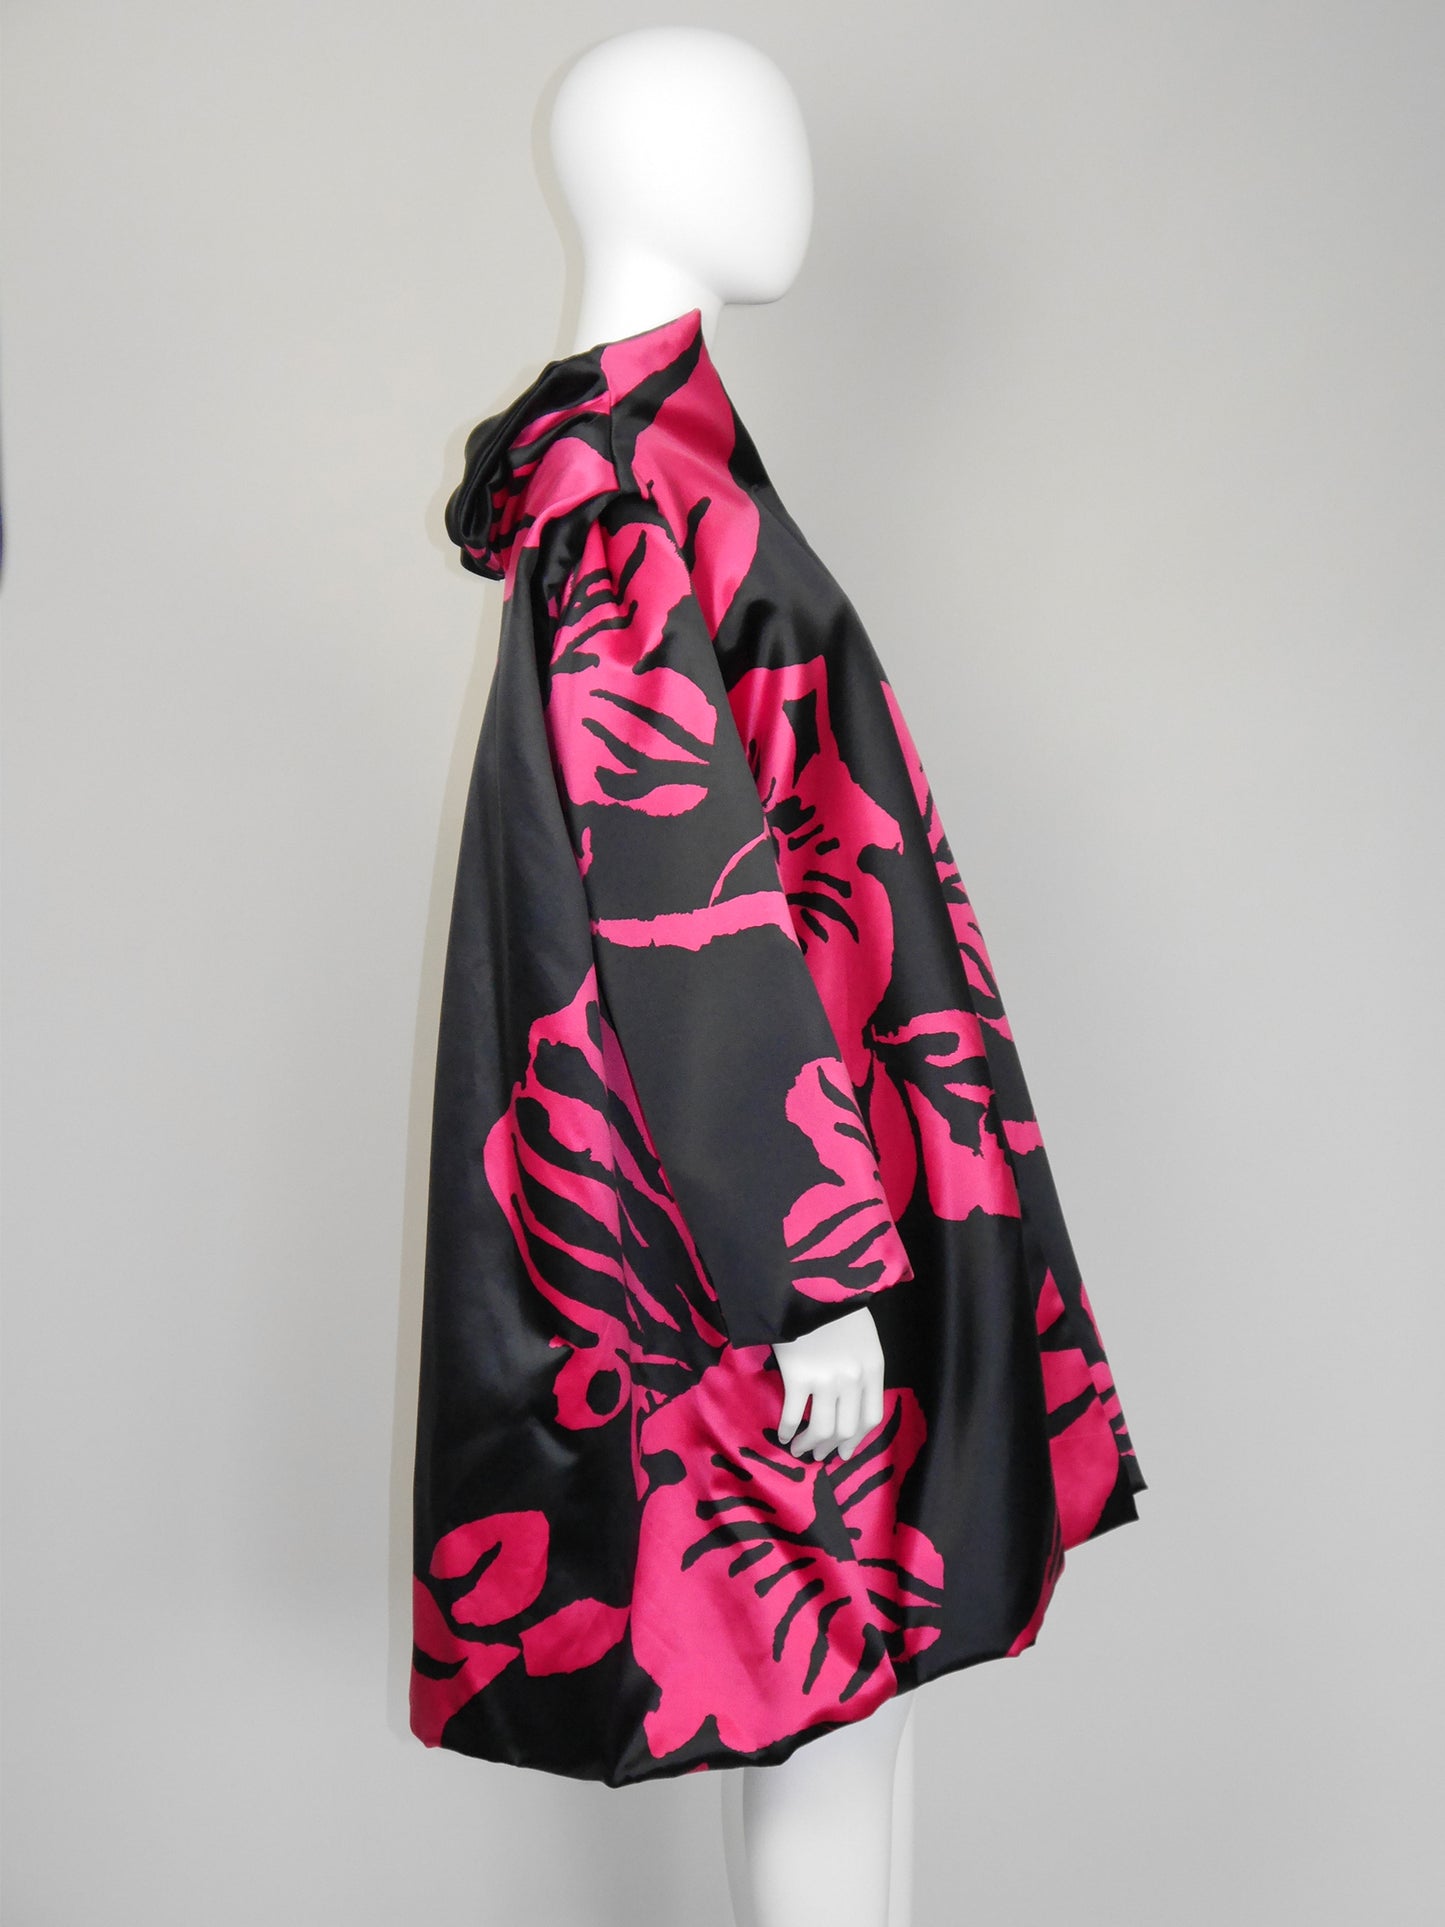 CHRISTIAN LACROIX Fall 1999 Vintage Oversized Floral Silk Evening Coat One-Size